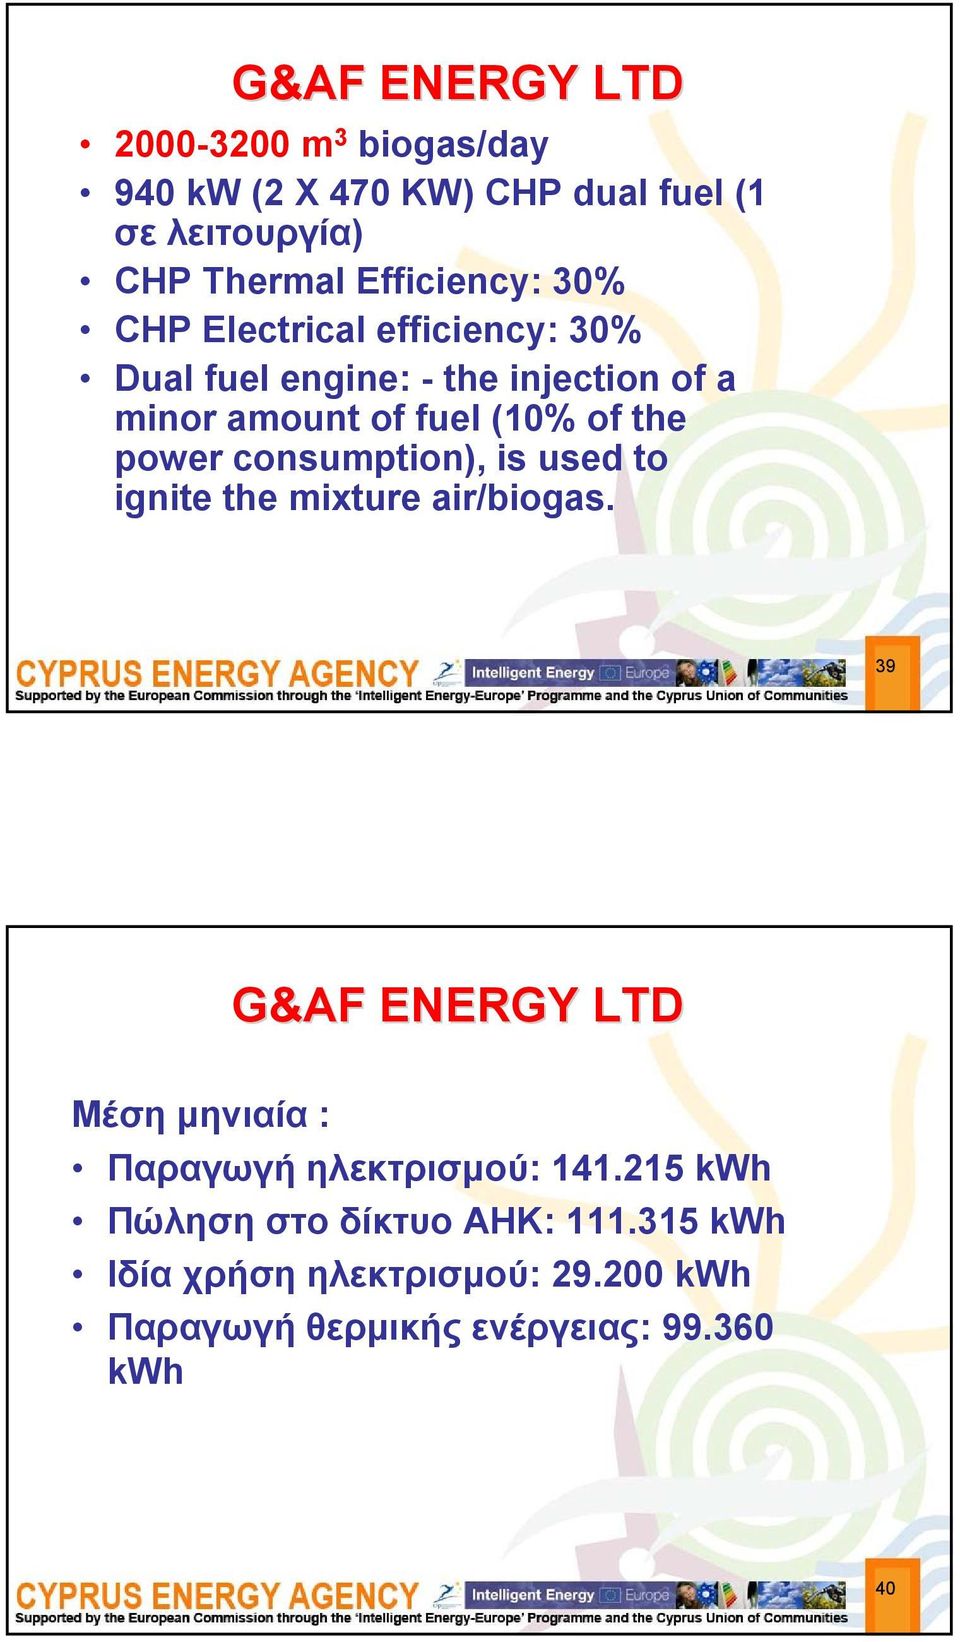 the power consumption), is used to ignite the mixture air/biogas.